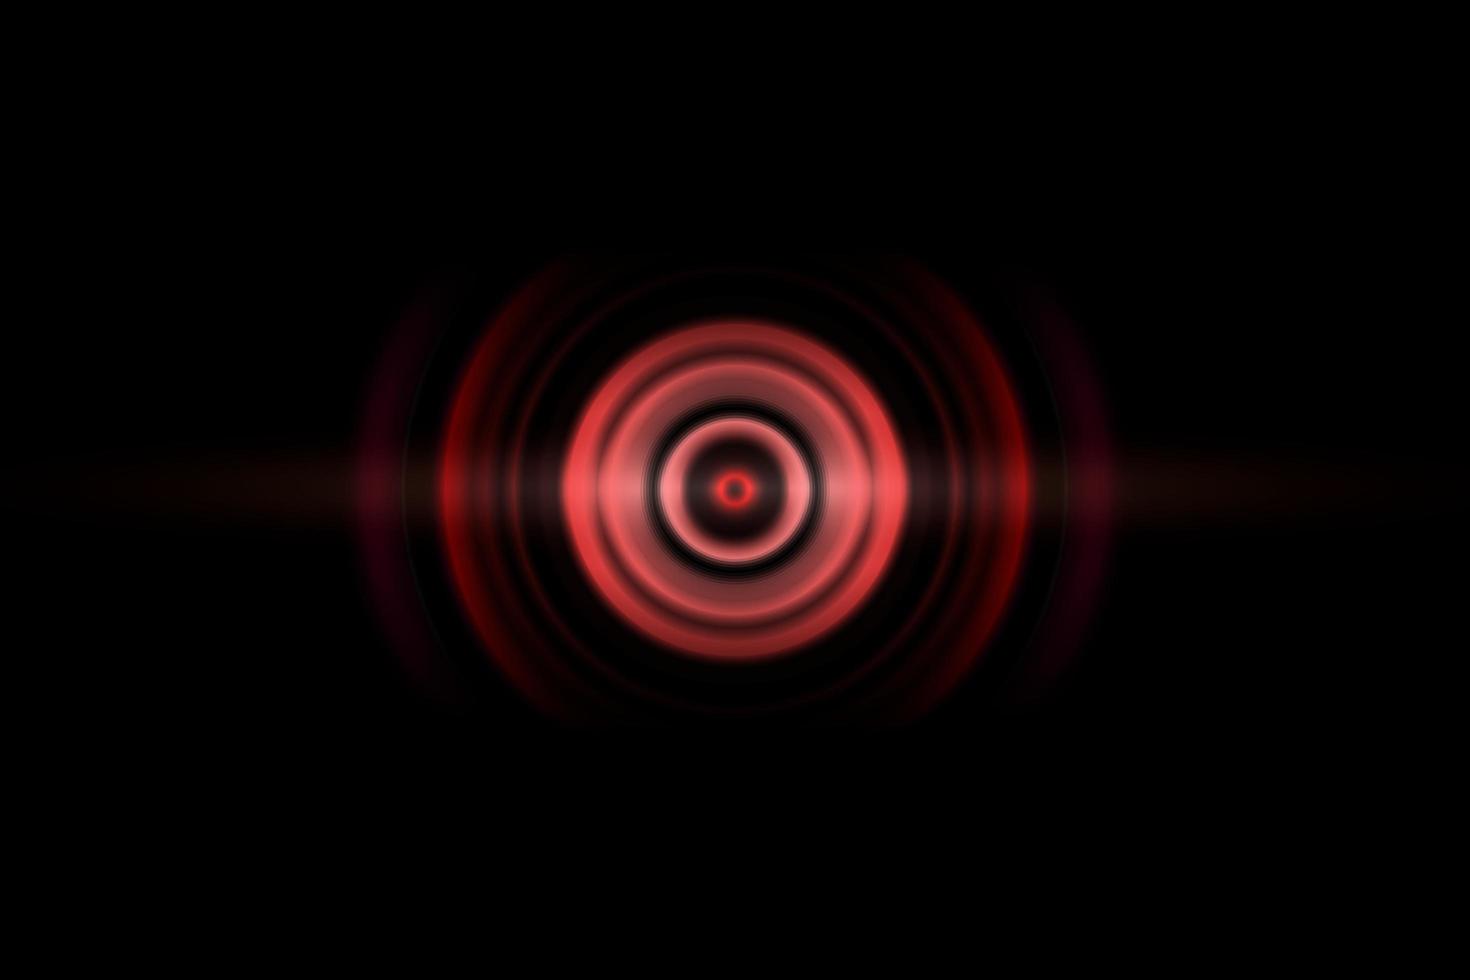 Red digital sound wave or circle signal, abstract background photo